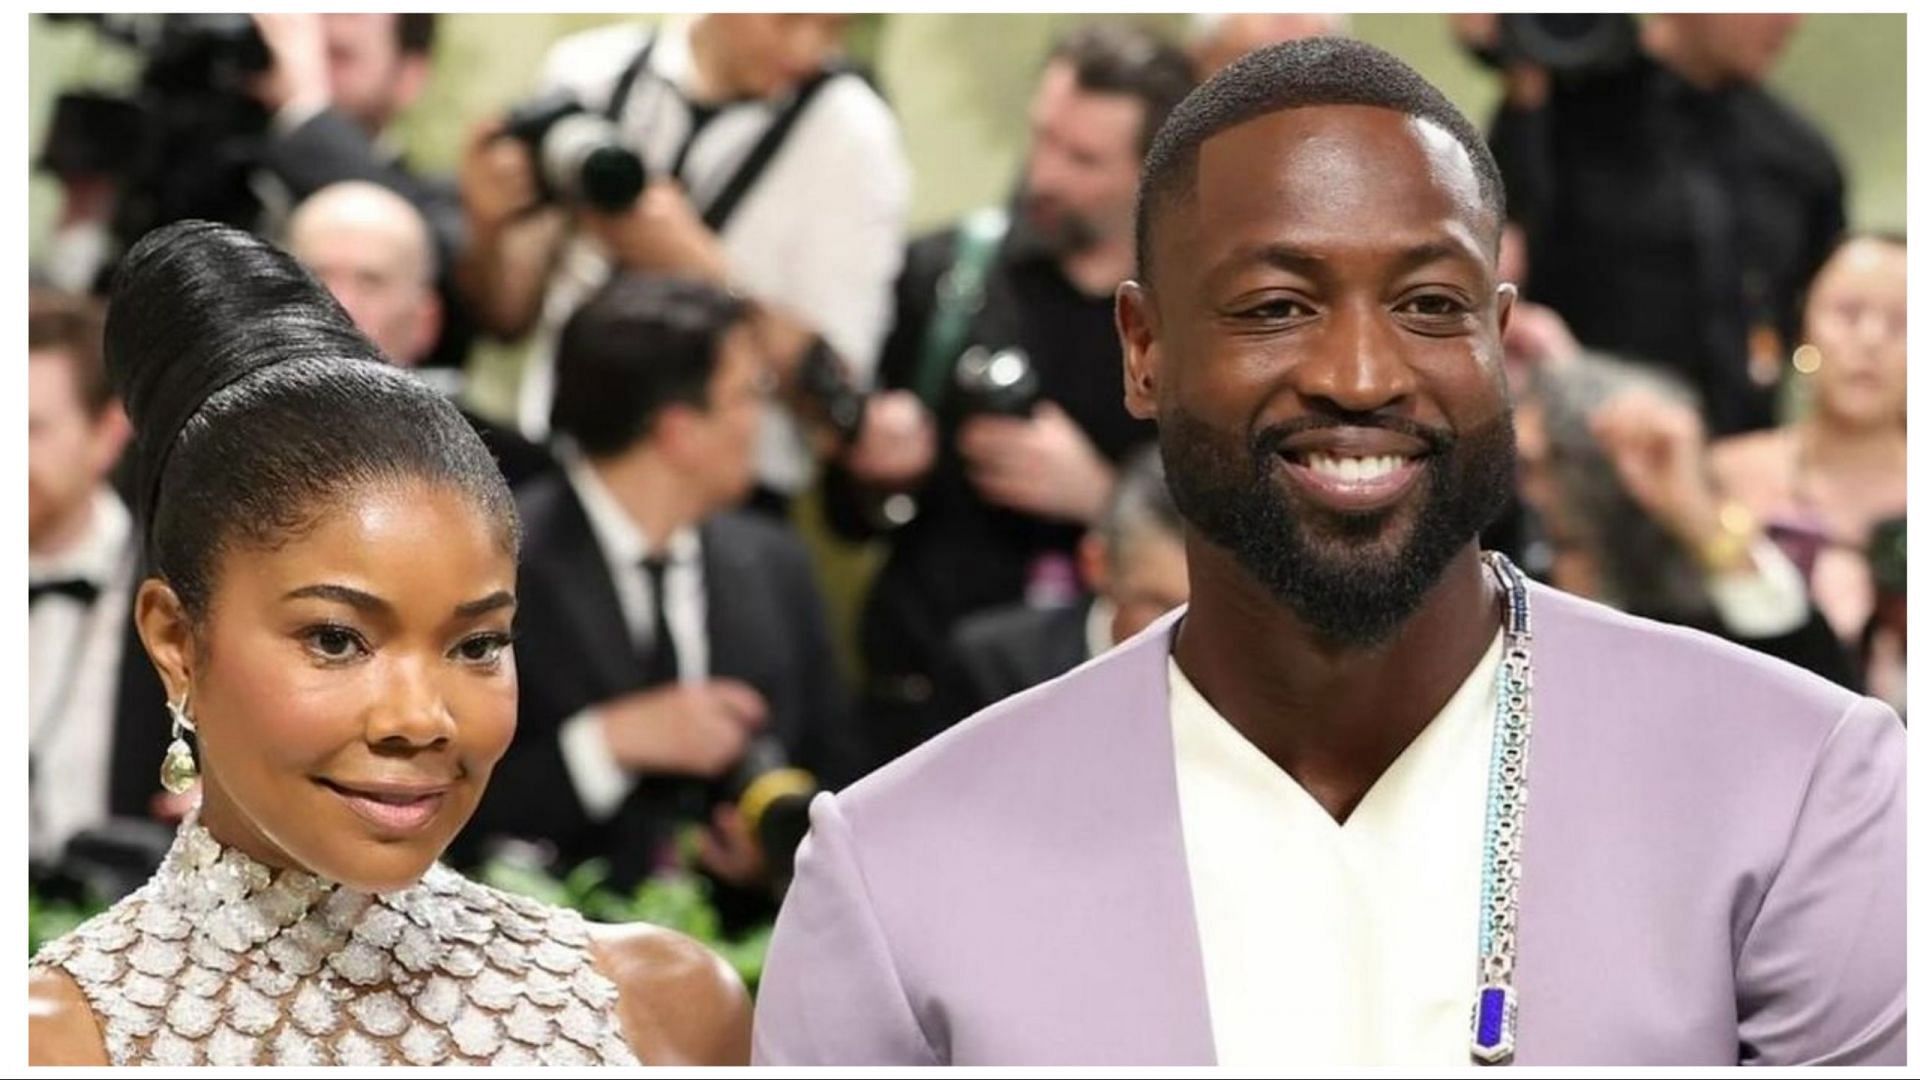 Dwyane Wade and Gabrielle Union share daughter